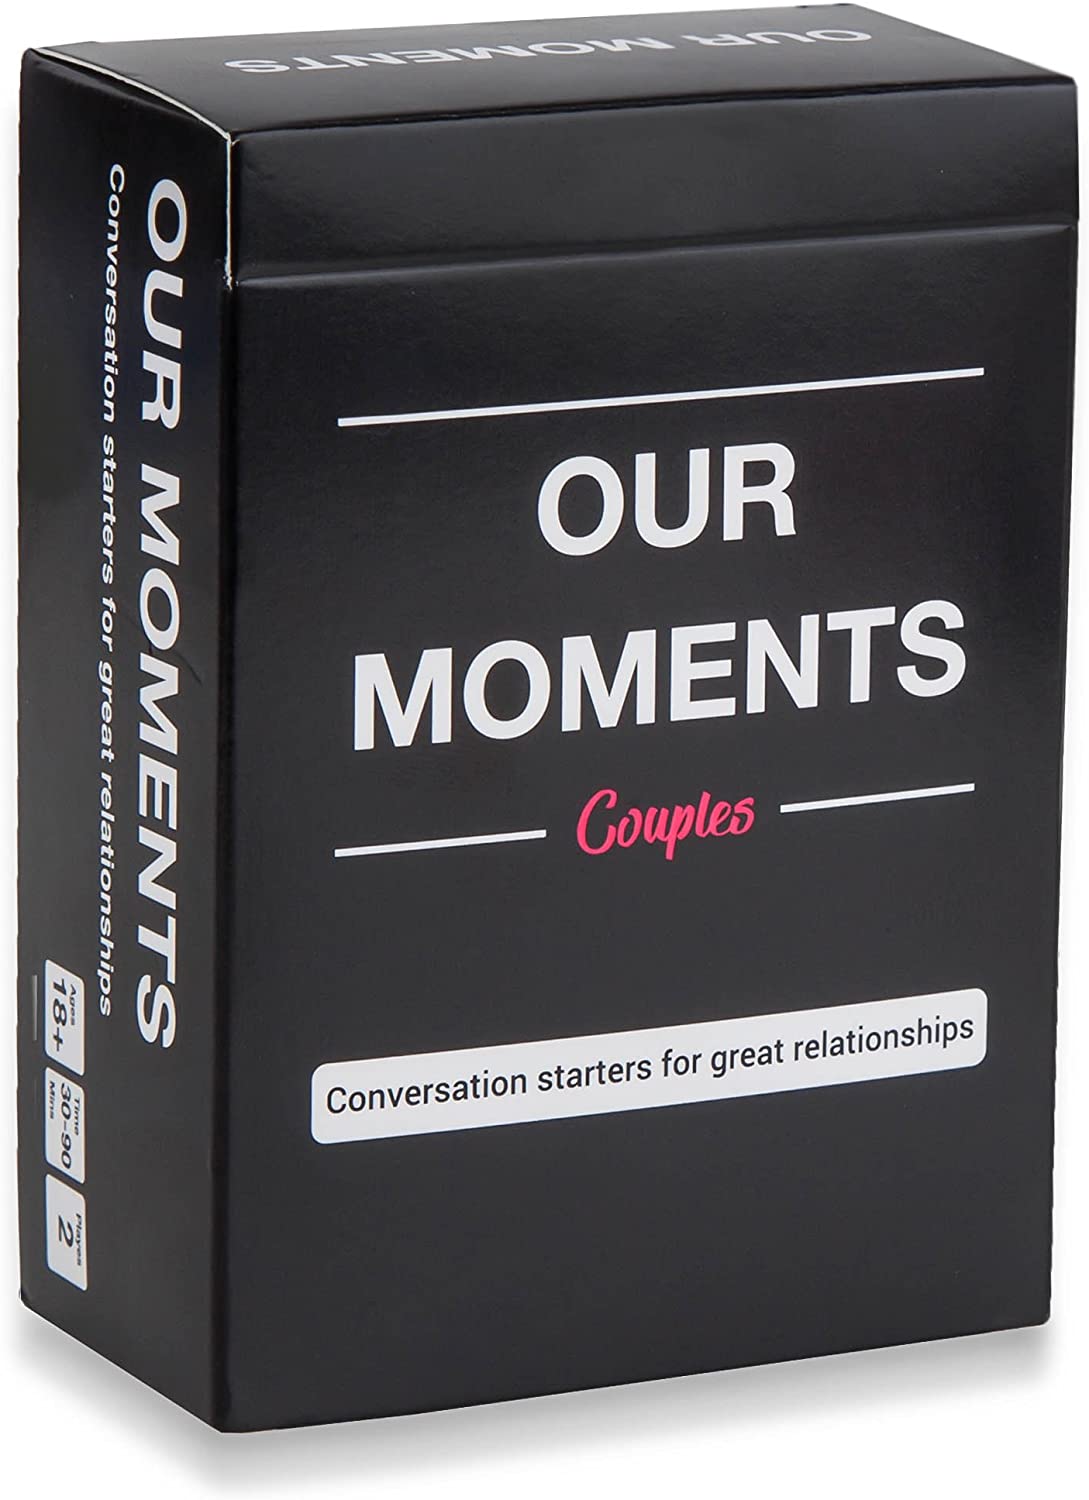 OUR MOMENTS Couples: 100 Thought Provoking Conversation Starters for Great Relationships